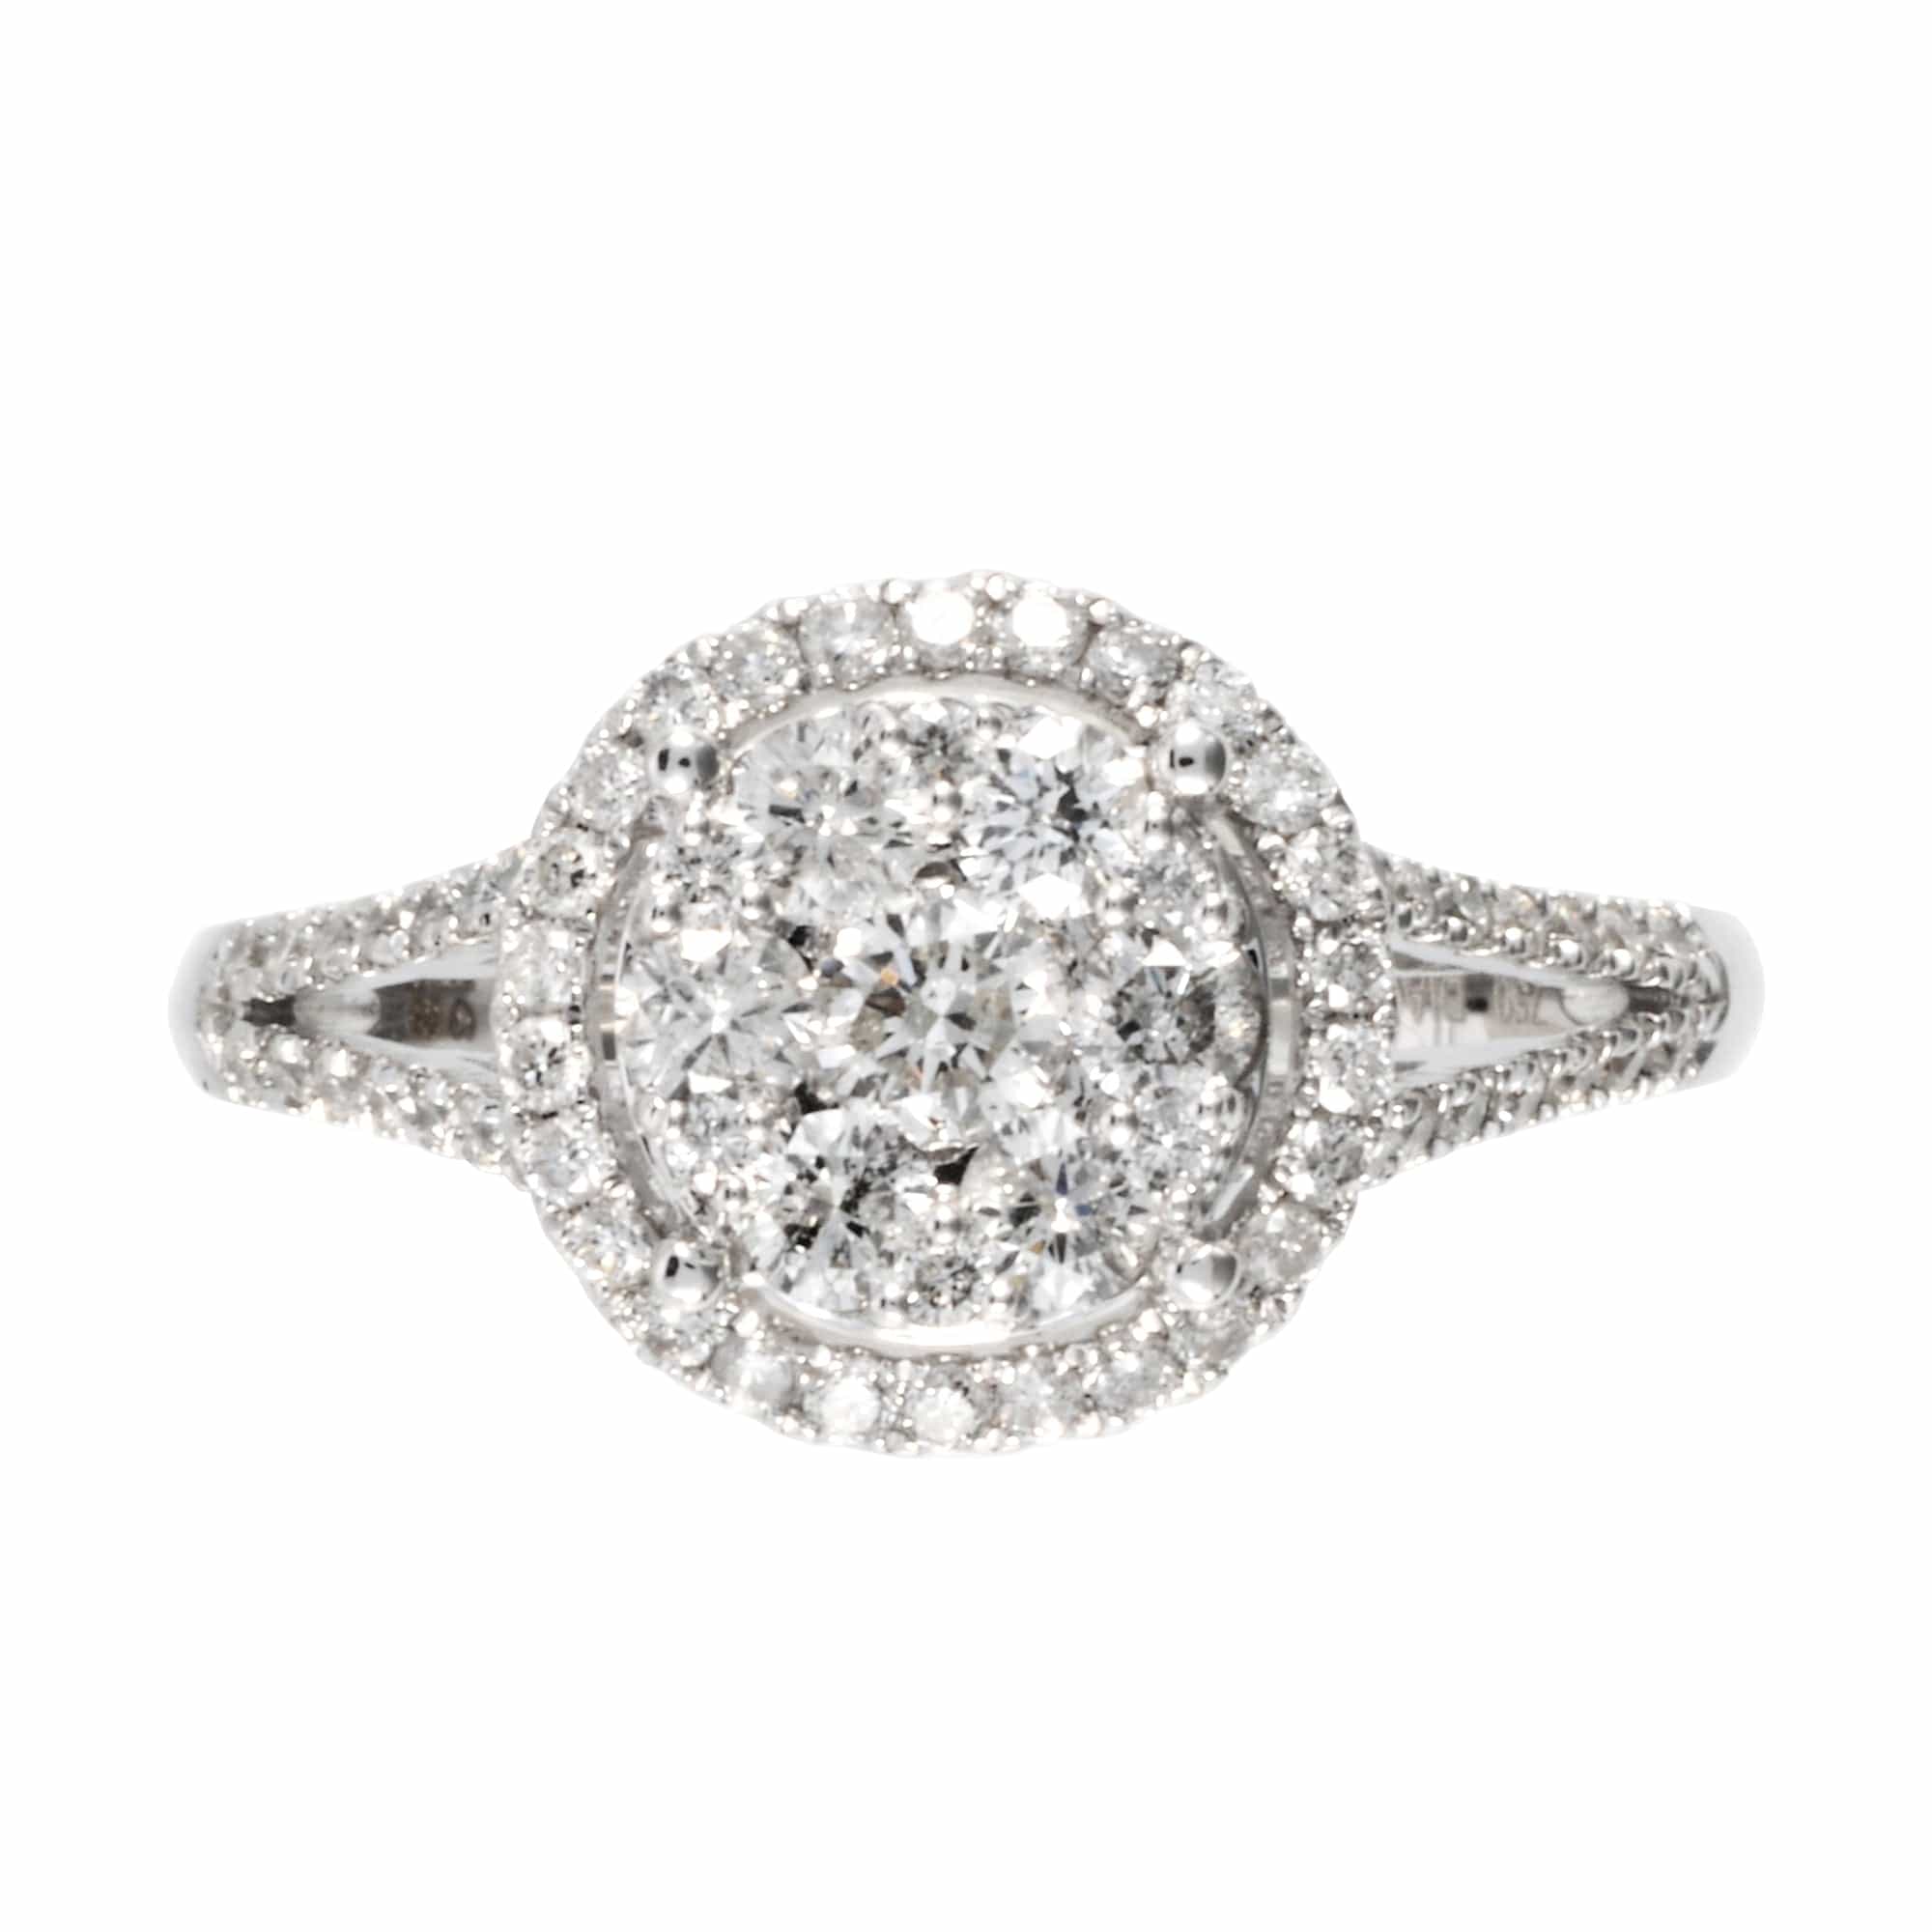 RG034343 Classic Round Diamond Split Shank Halo Cluster Ring in 18ct White Gold 2